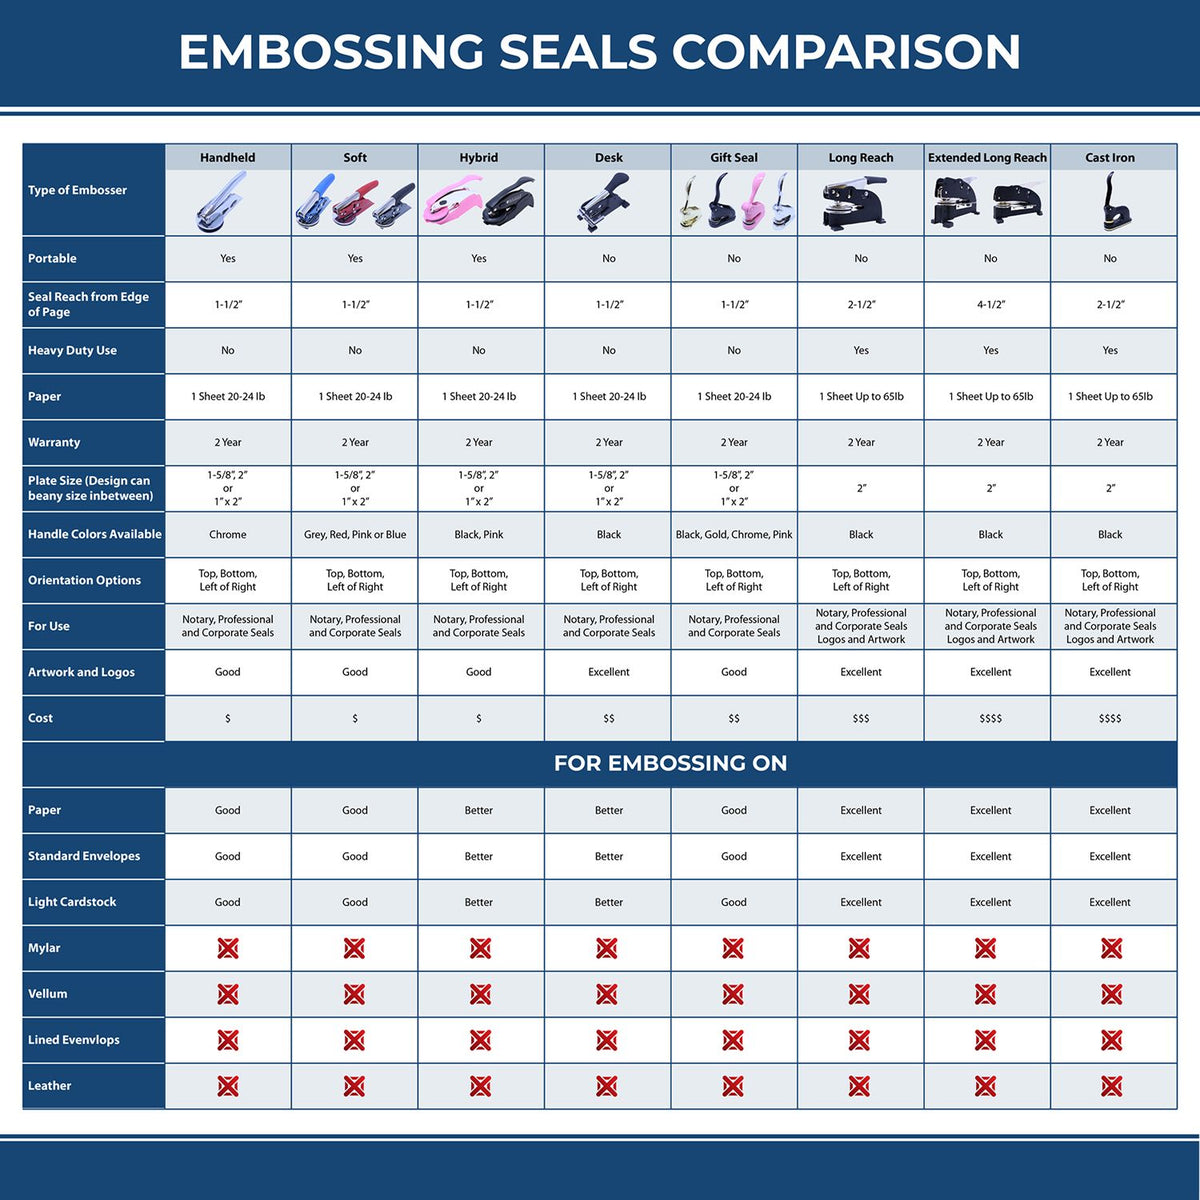 A comparison chart for the different types of mount models available for the Long Reach Florida PE Seal.